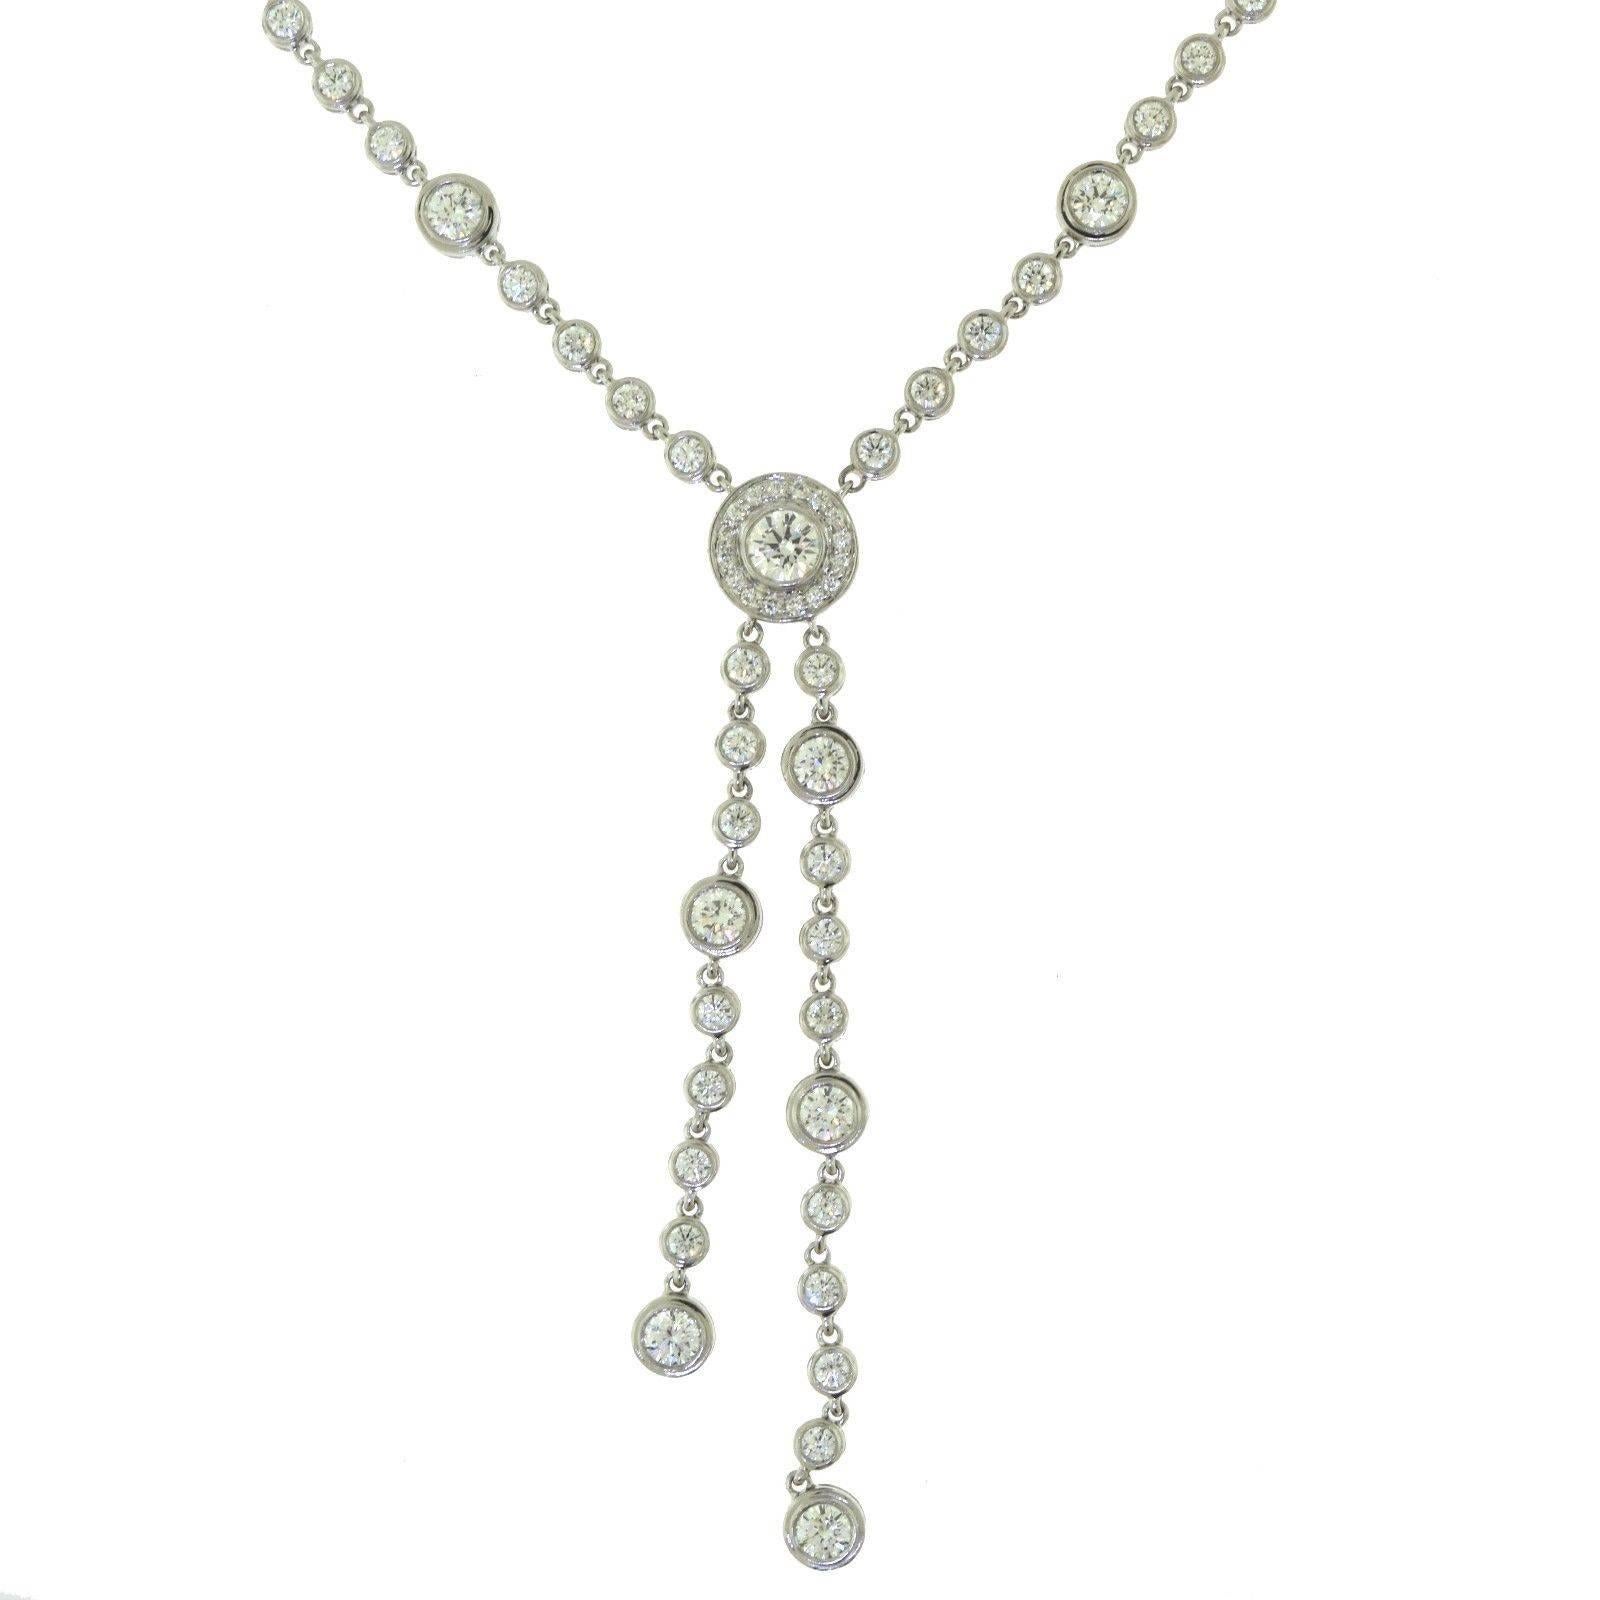 A gorgeous 2-Piece Necklace and Earring set by Tiffany & Co's Tiffany Circlet collection

EARRINGS:
Stones: Round Brilliant Cut Diamonds
Diamond Color/Clarity: F/VVS
Total Carat Weight: 2.80 ct (1.40 ct each earring)
Total Item Weight (g): 12.2
Drop